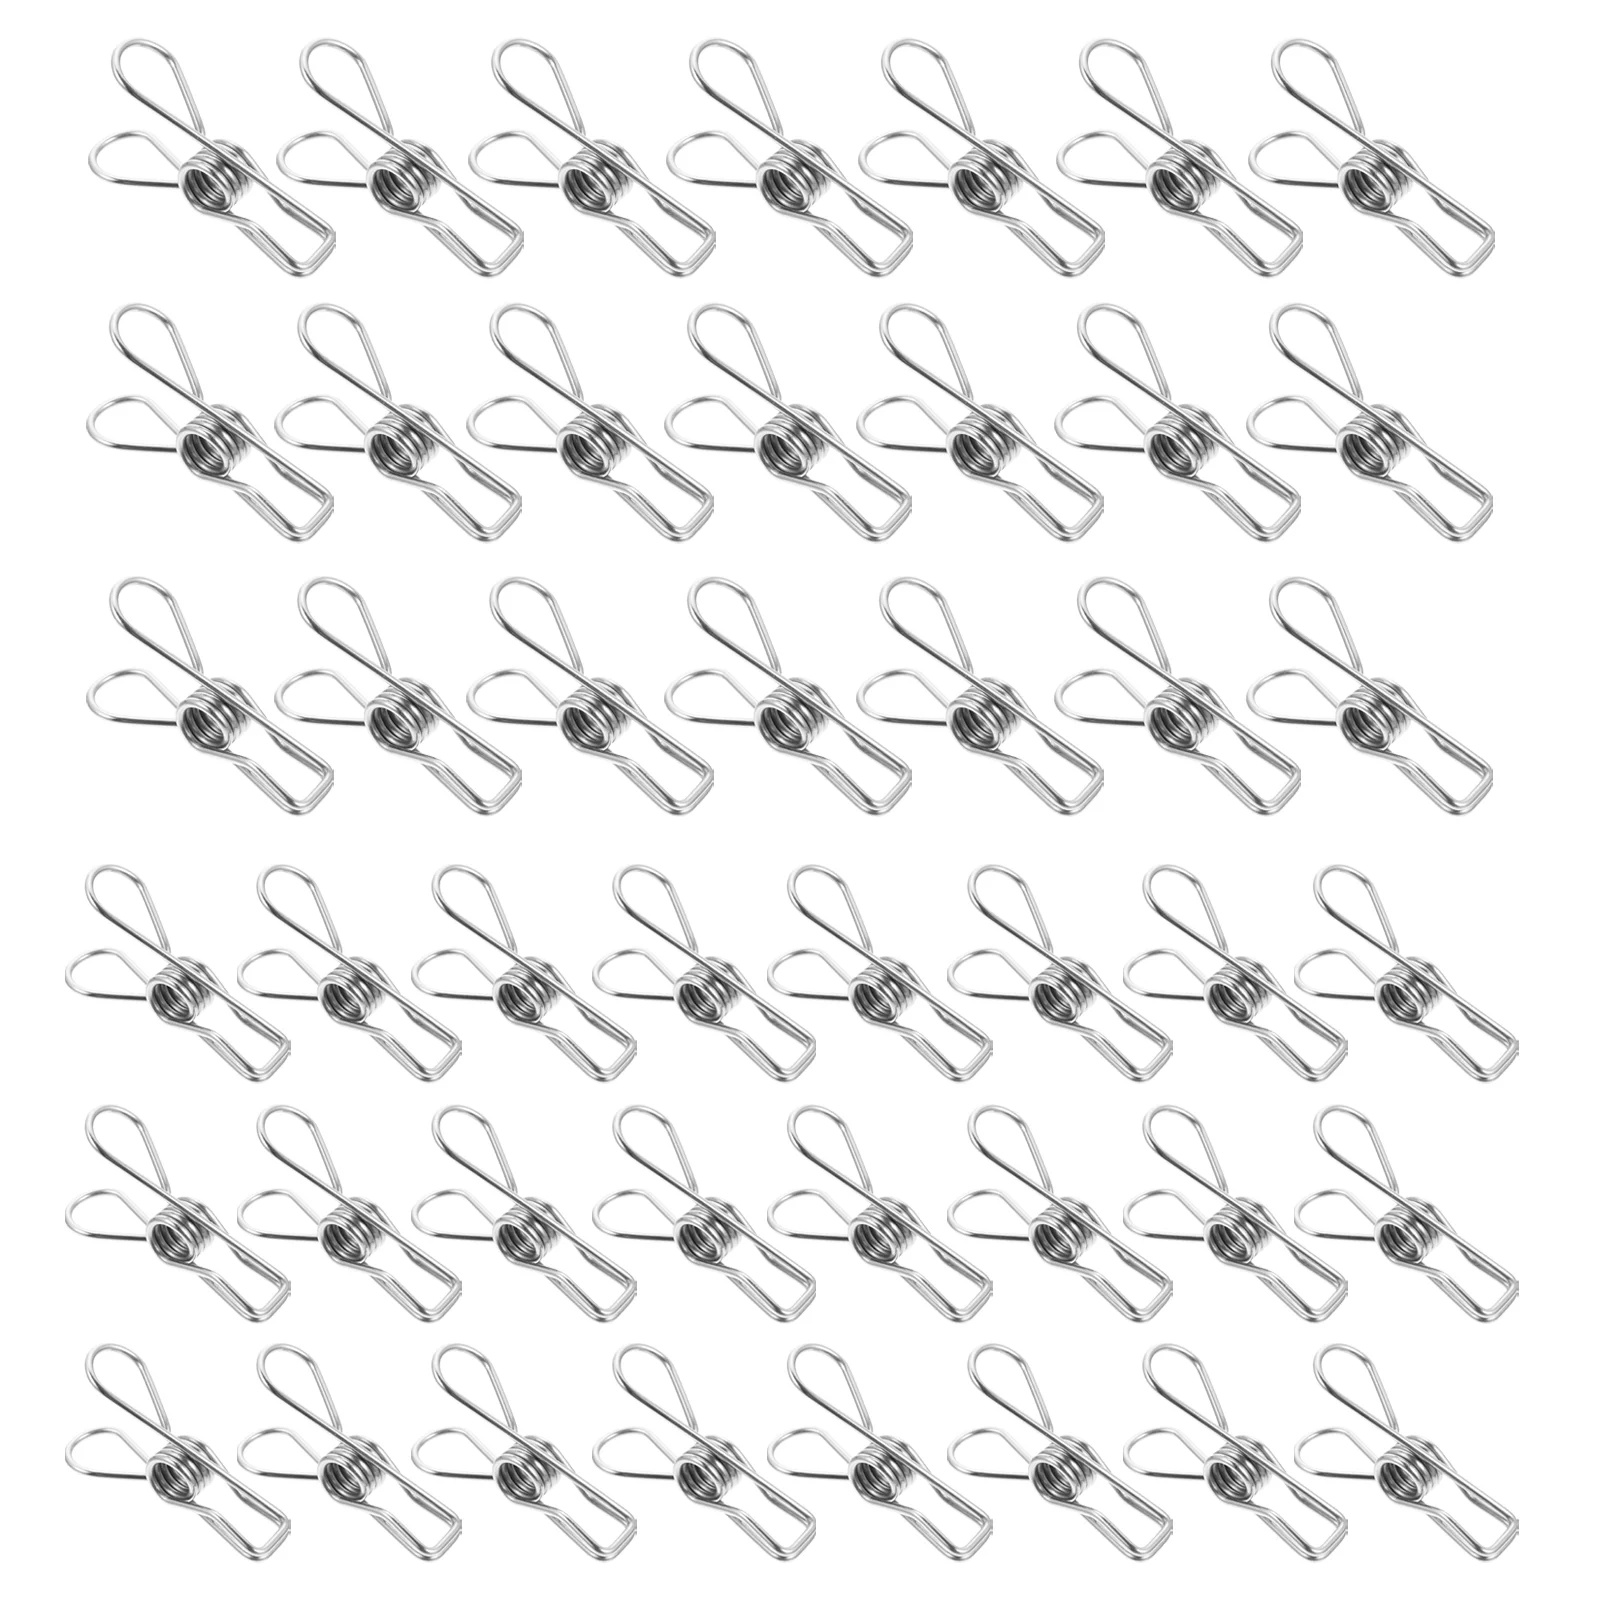 

100 Pcs Clips Stainless Steel Clothes Pin Laundry Clips Clothesline Utility Clips Stainless Clothespin Wire Clothespins